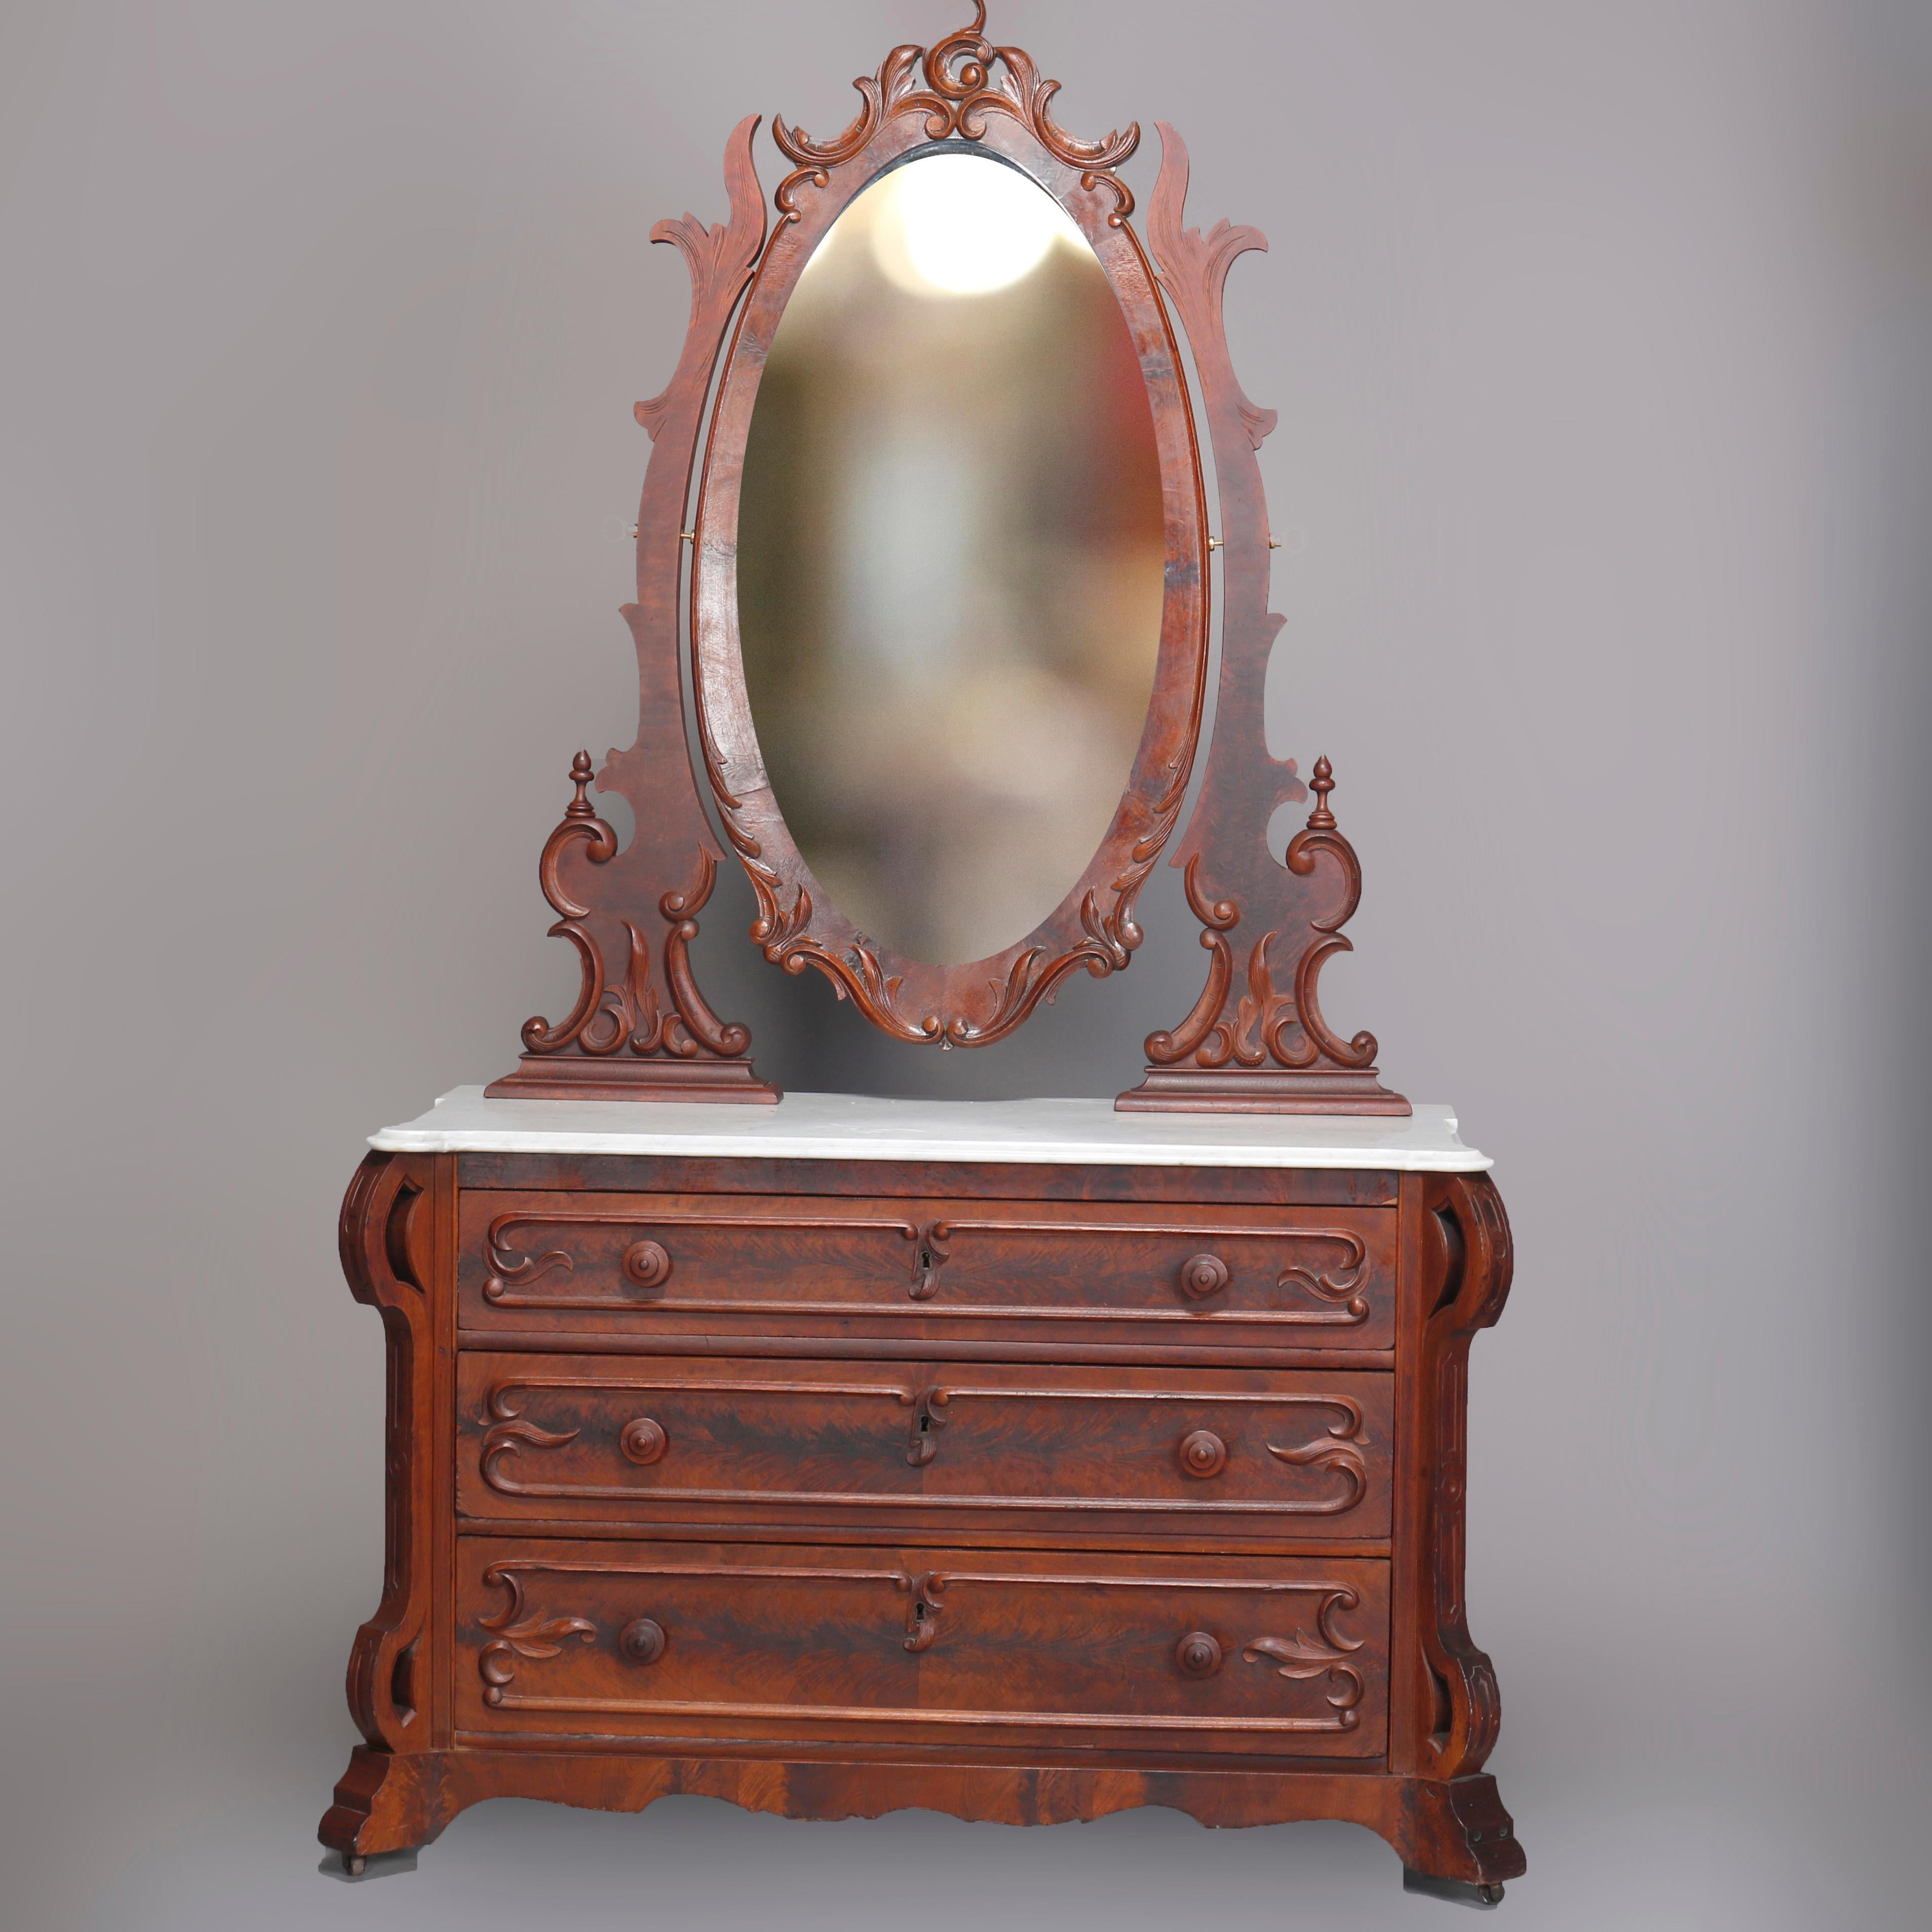 Antique Renaissance Revival Flame Mahogany and Marble Dresser, circa 1880 For Sale 5